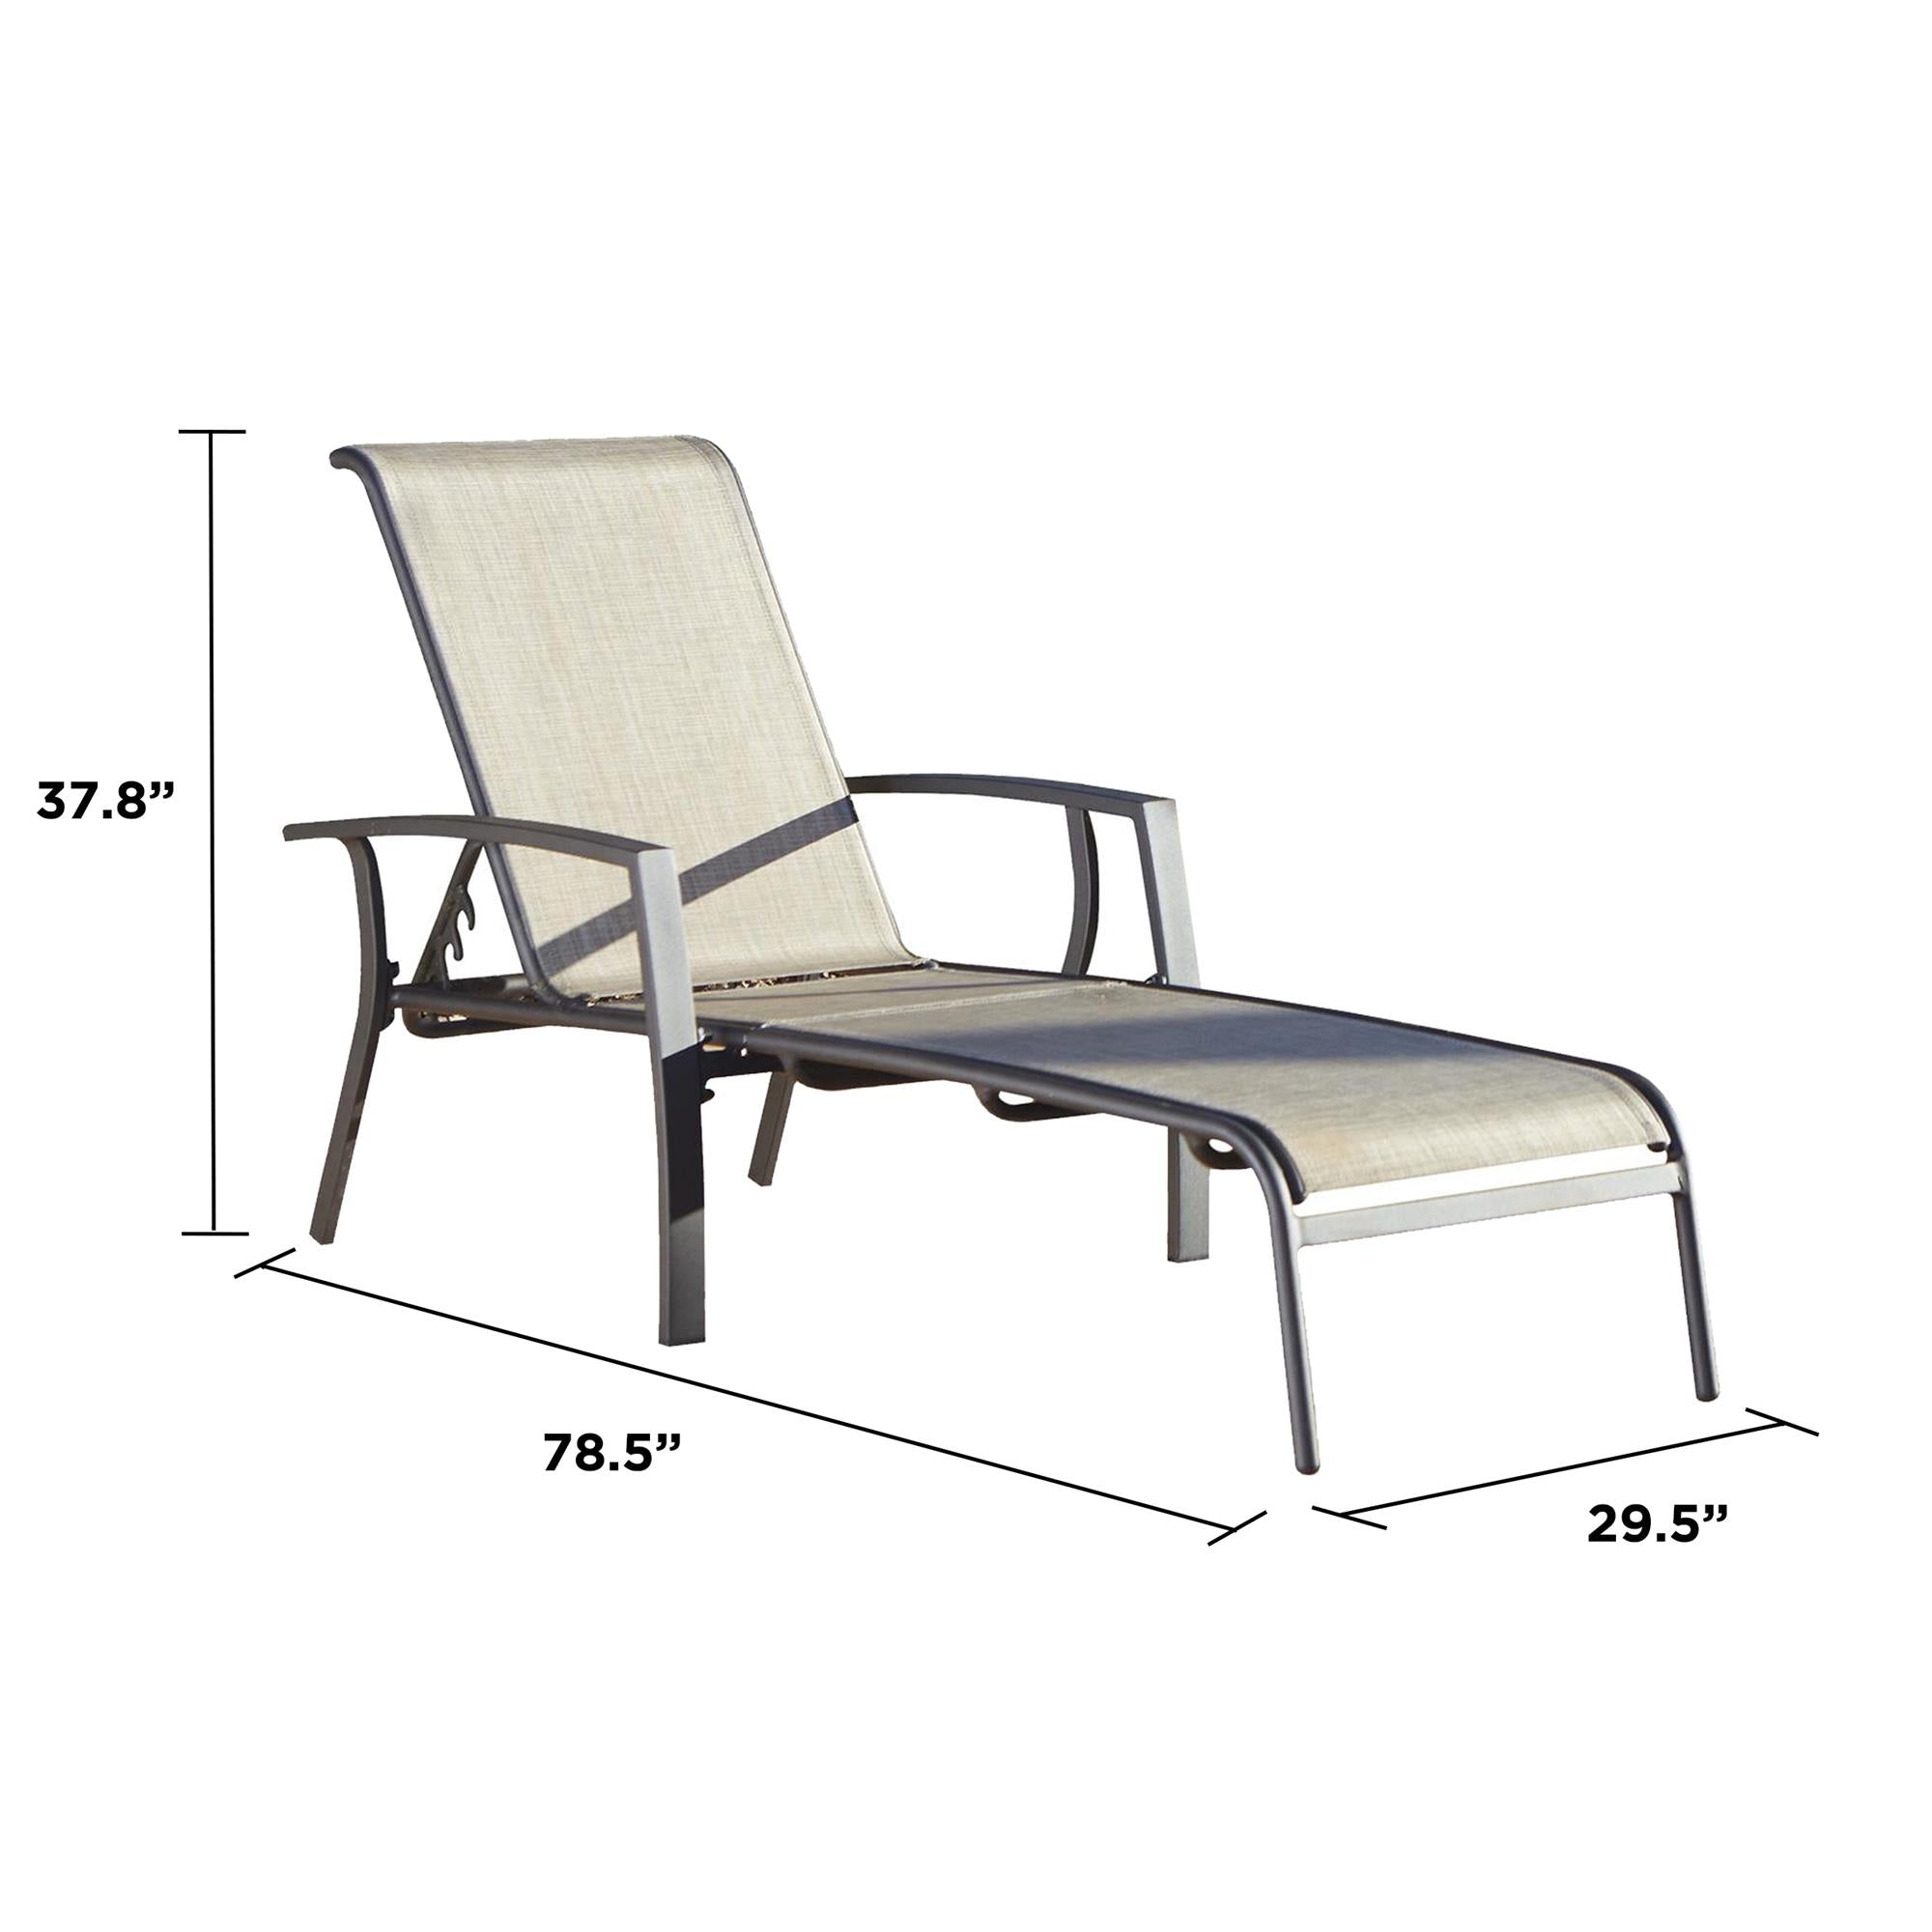 Adjustable Aluminum Chaise Lounge Chair - Cosco